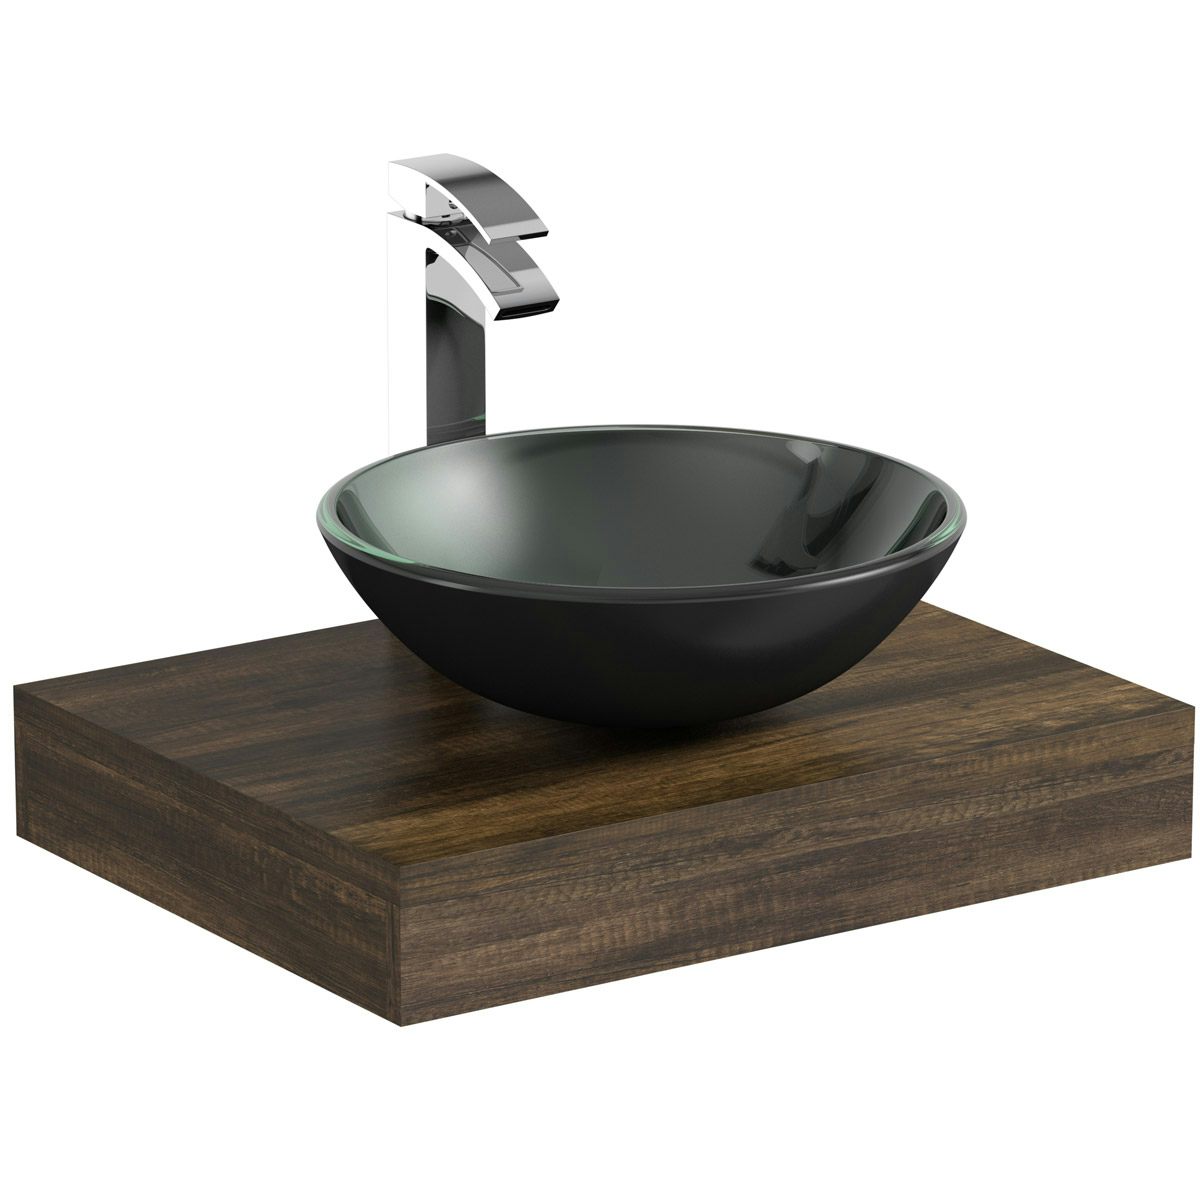 The Bath Co. Dalston countertop shelf 600mm with Mackintosh black glass countertop basin, tap and waste